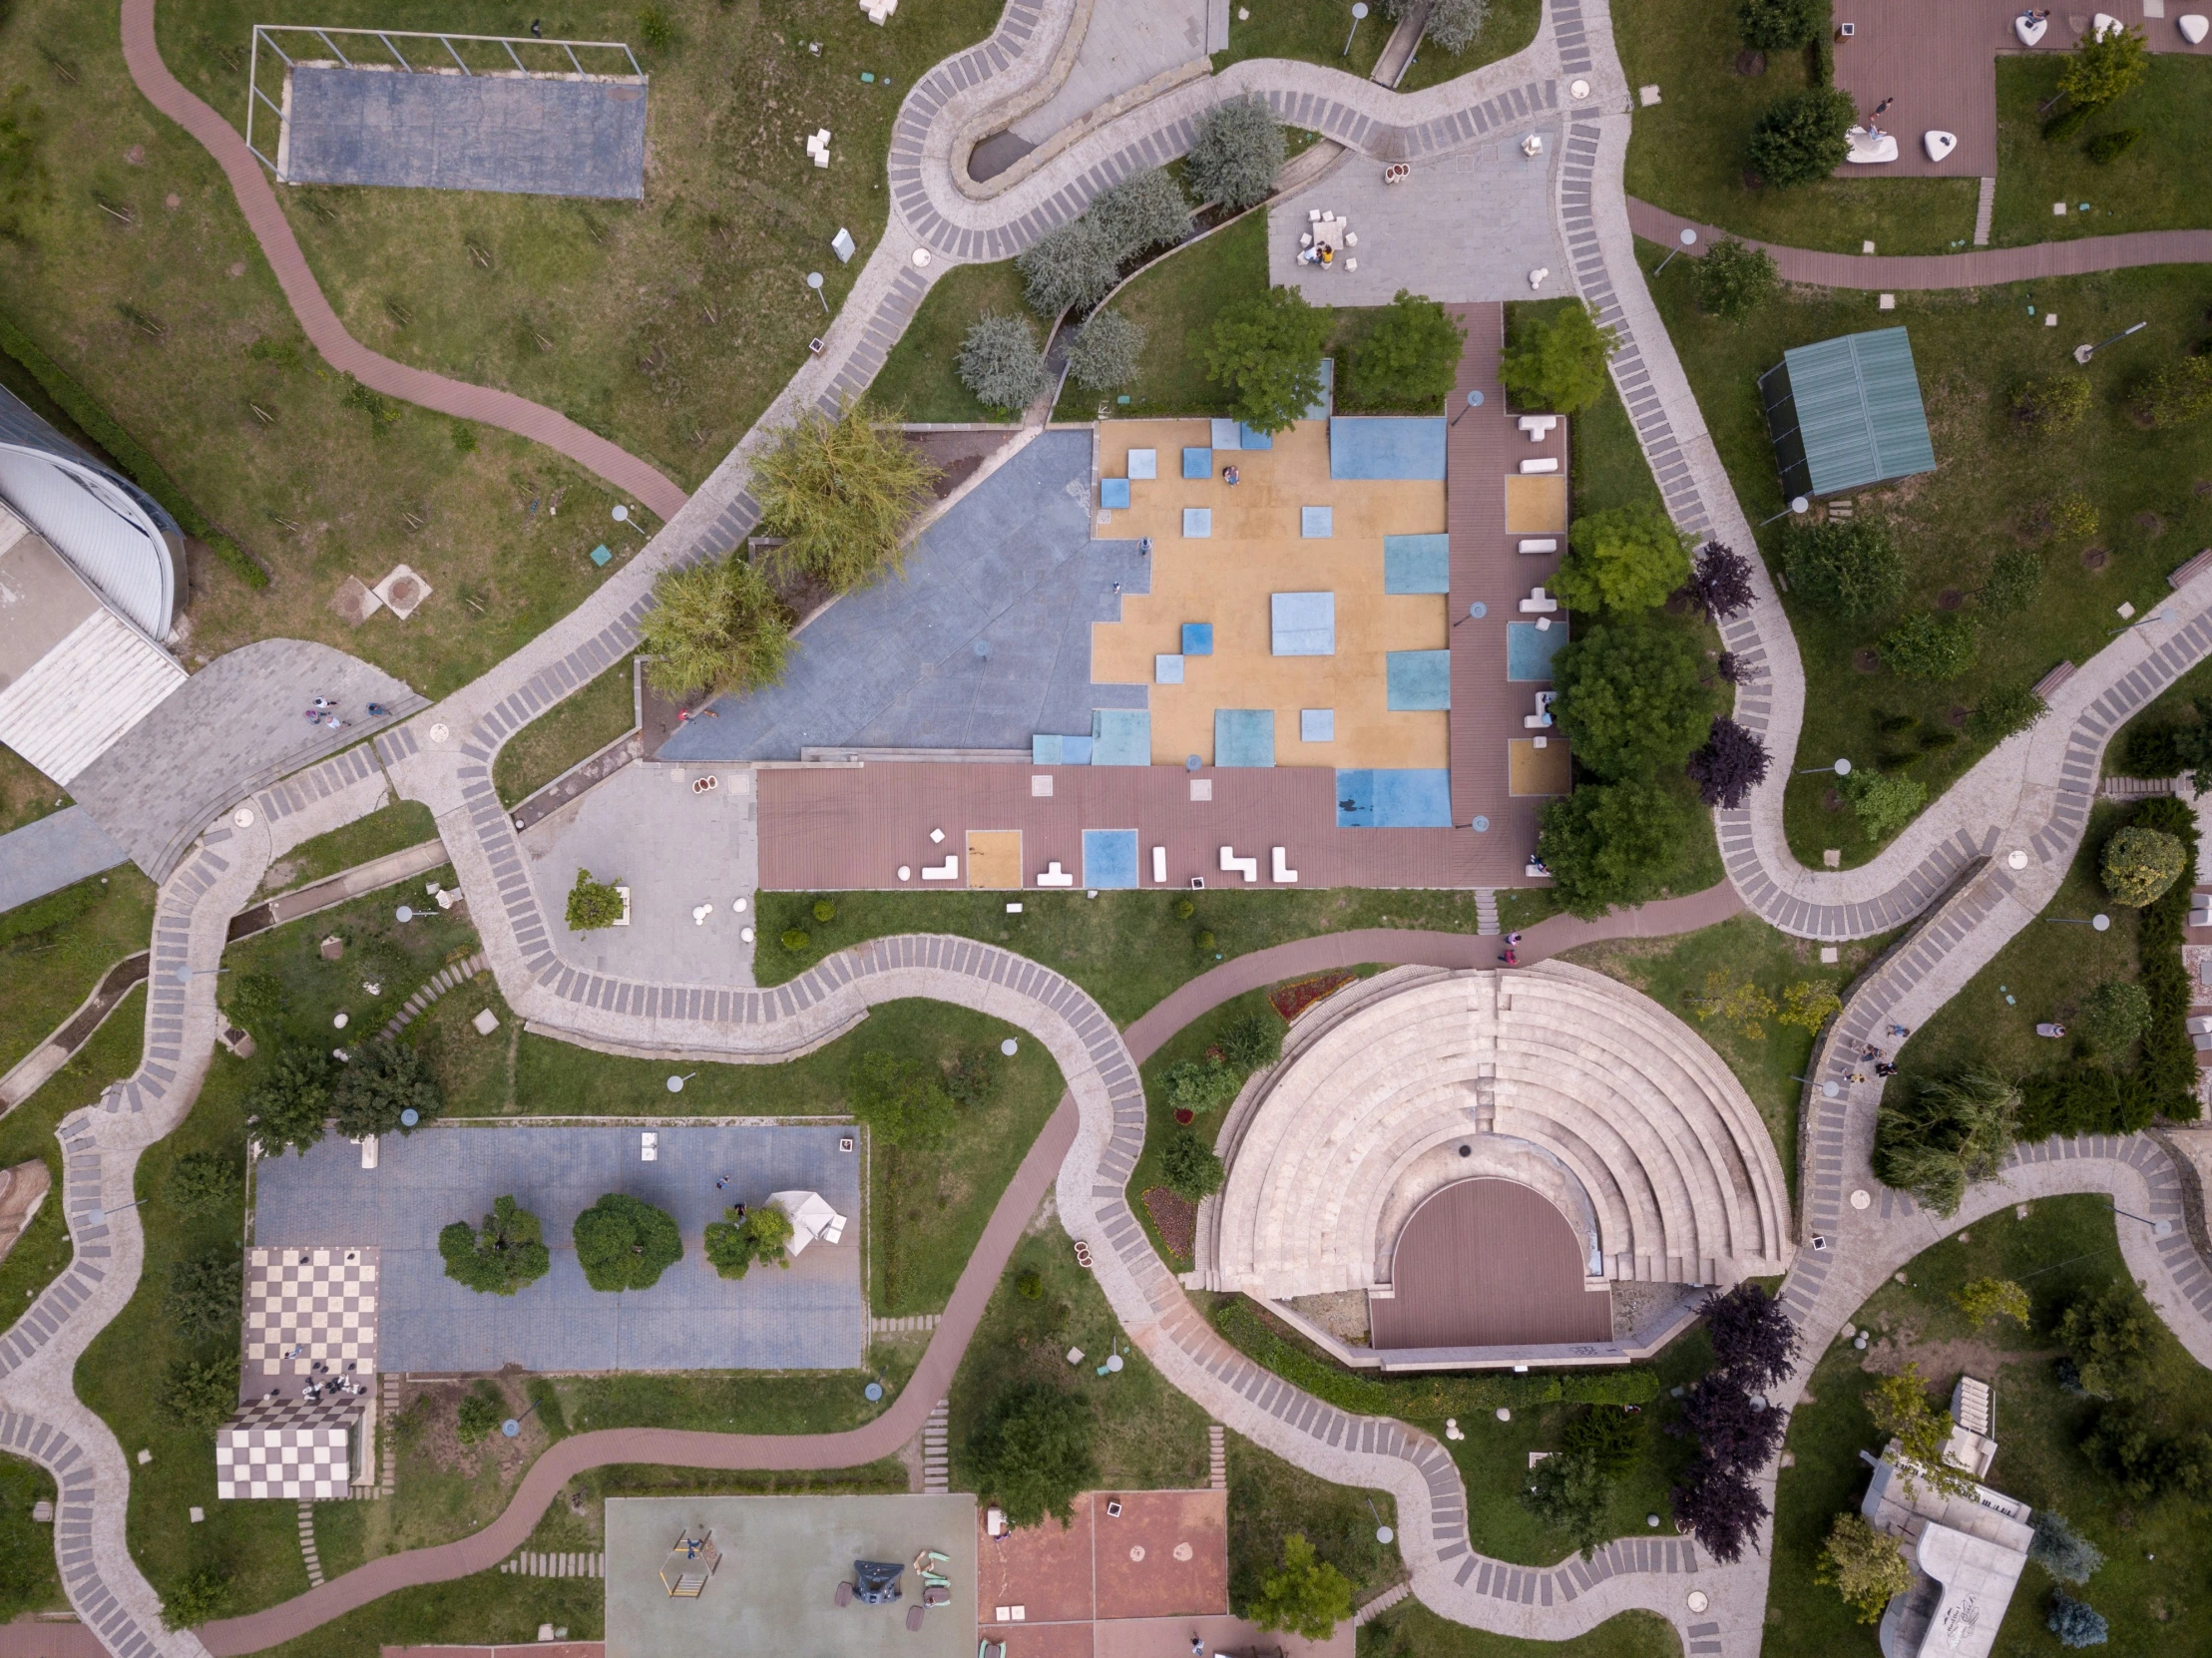 a large park with many buildings and a playground on it